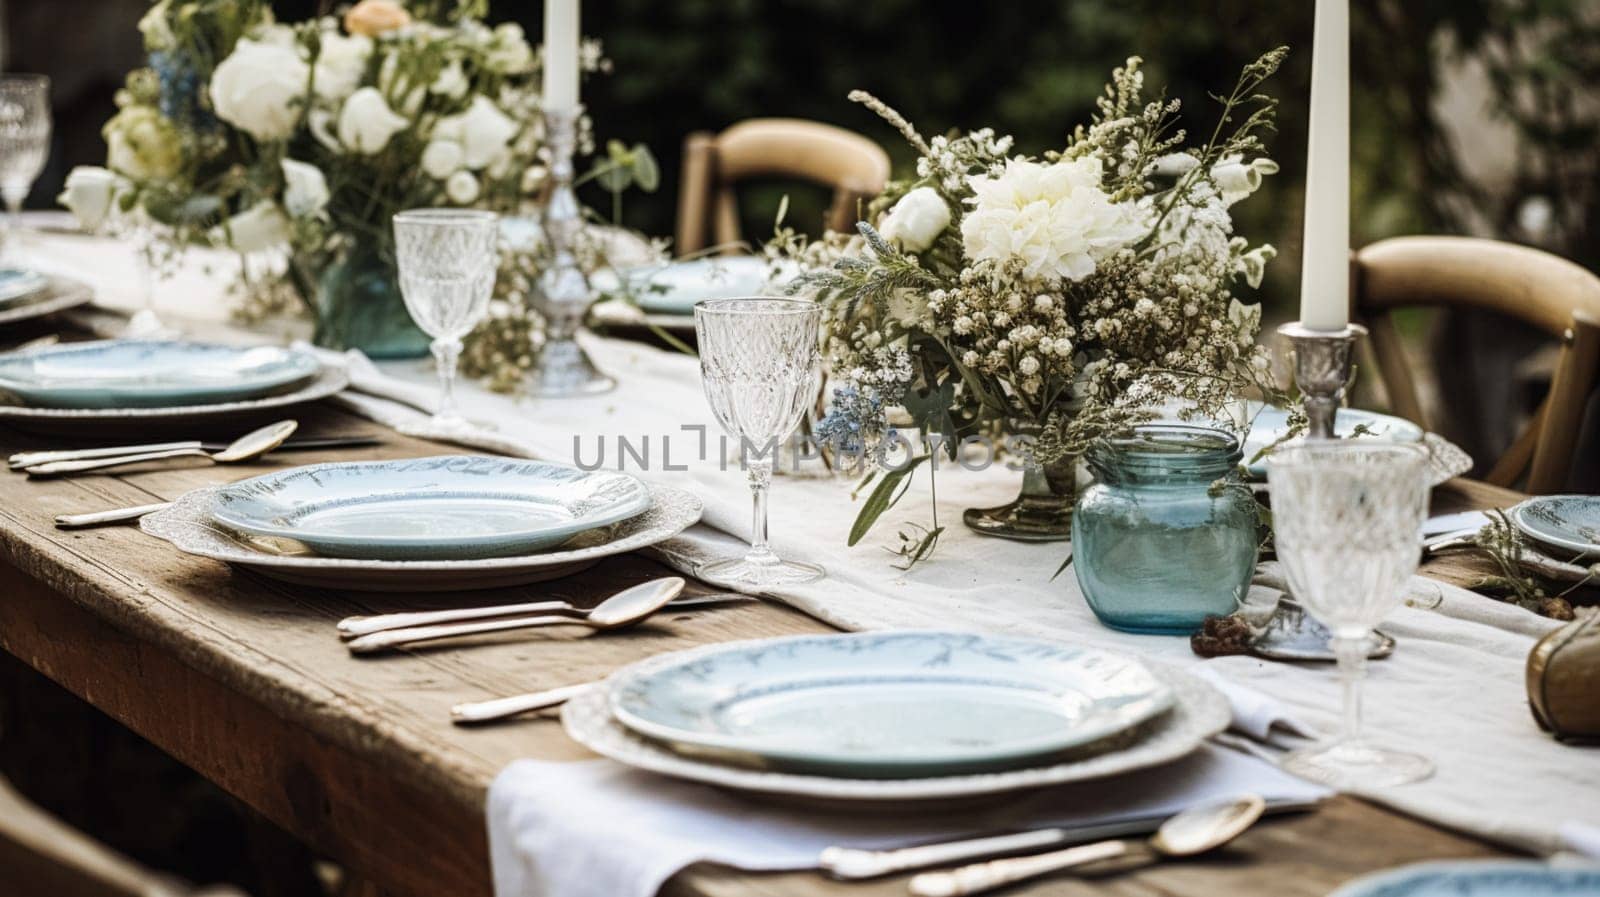 Table decor, holiday tablescape and dinner table setting in countryside garden, formal event decoration for wedding, family celebration, English country and home styling by Anneleven